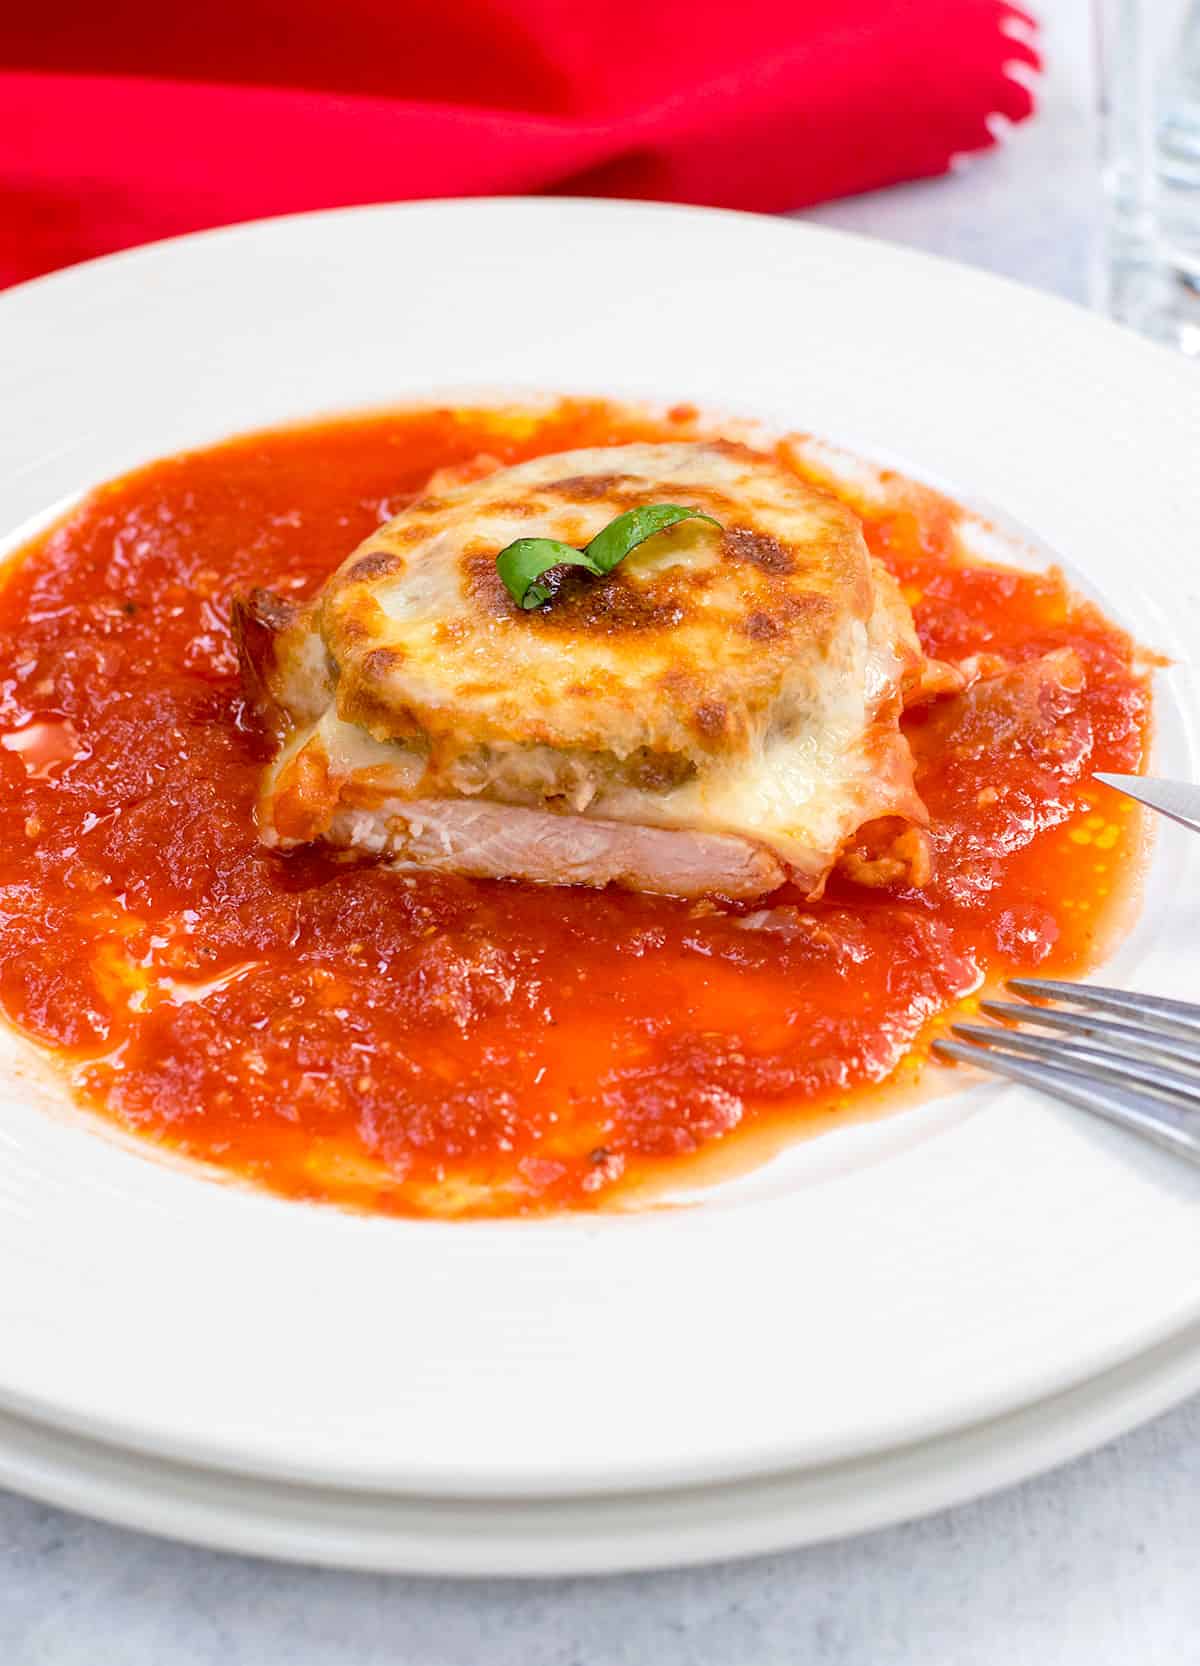 Chicken topped with melted cheese and eggplant in a pool of tomato sauce 